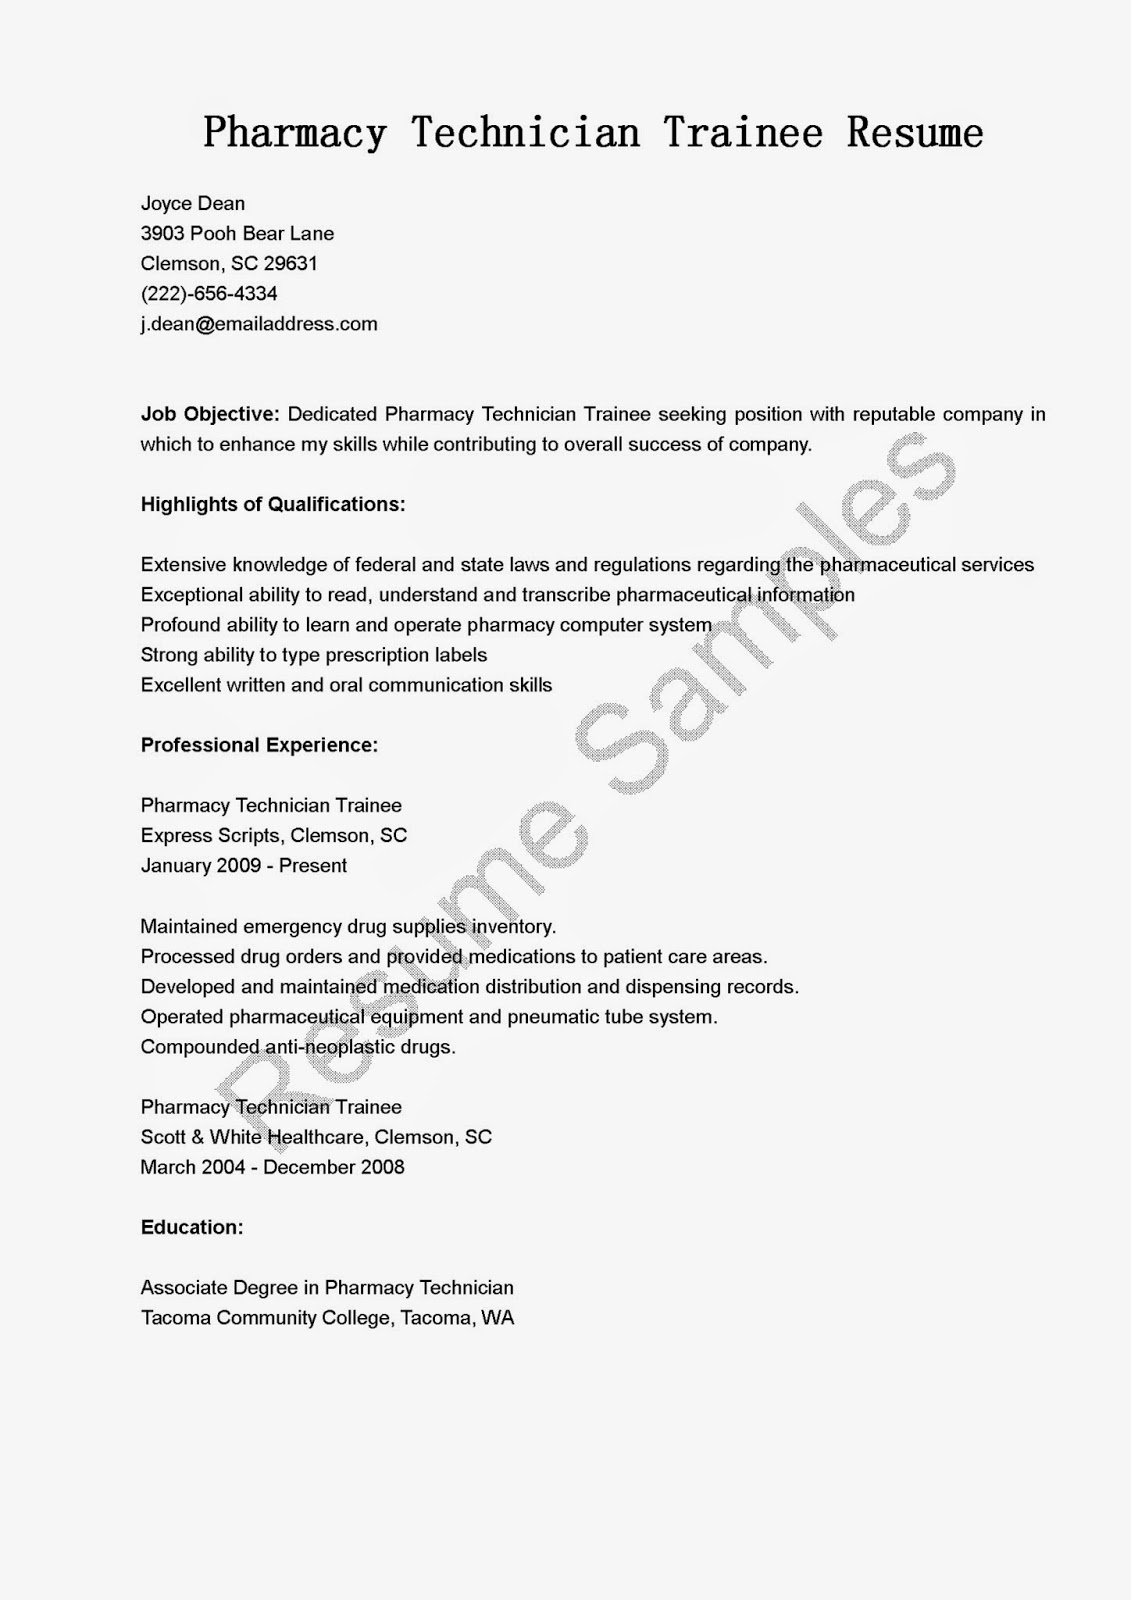 Sample contract manager resume functional format